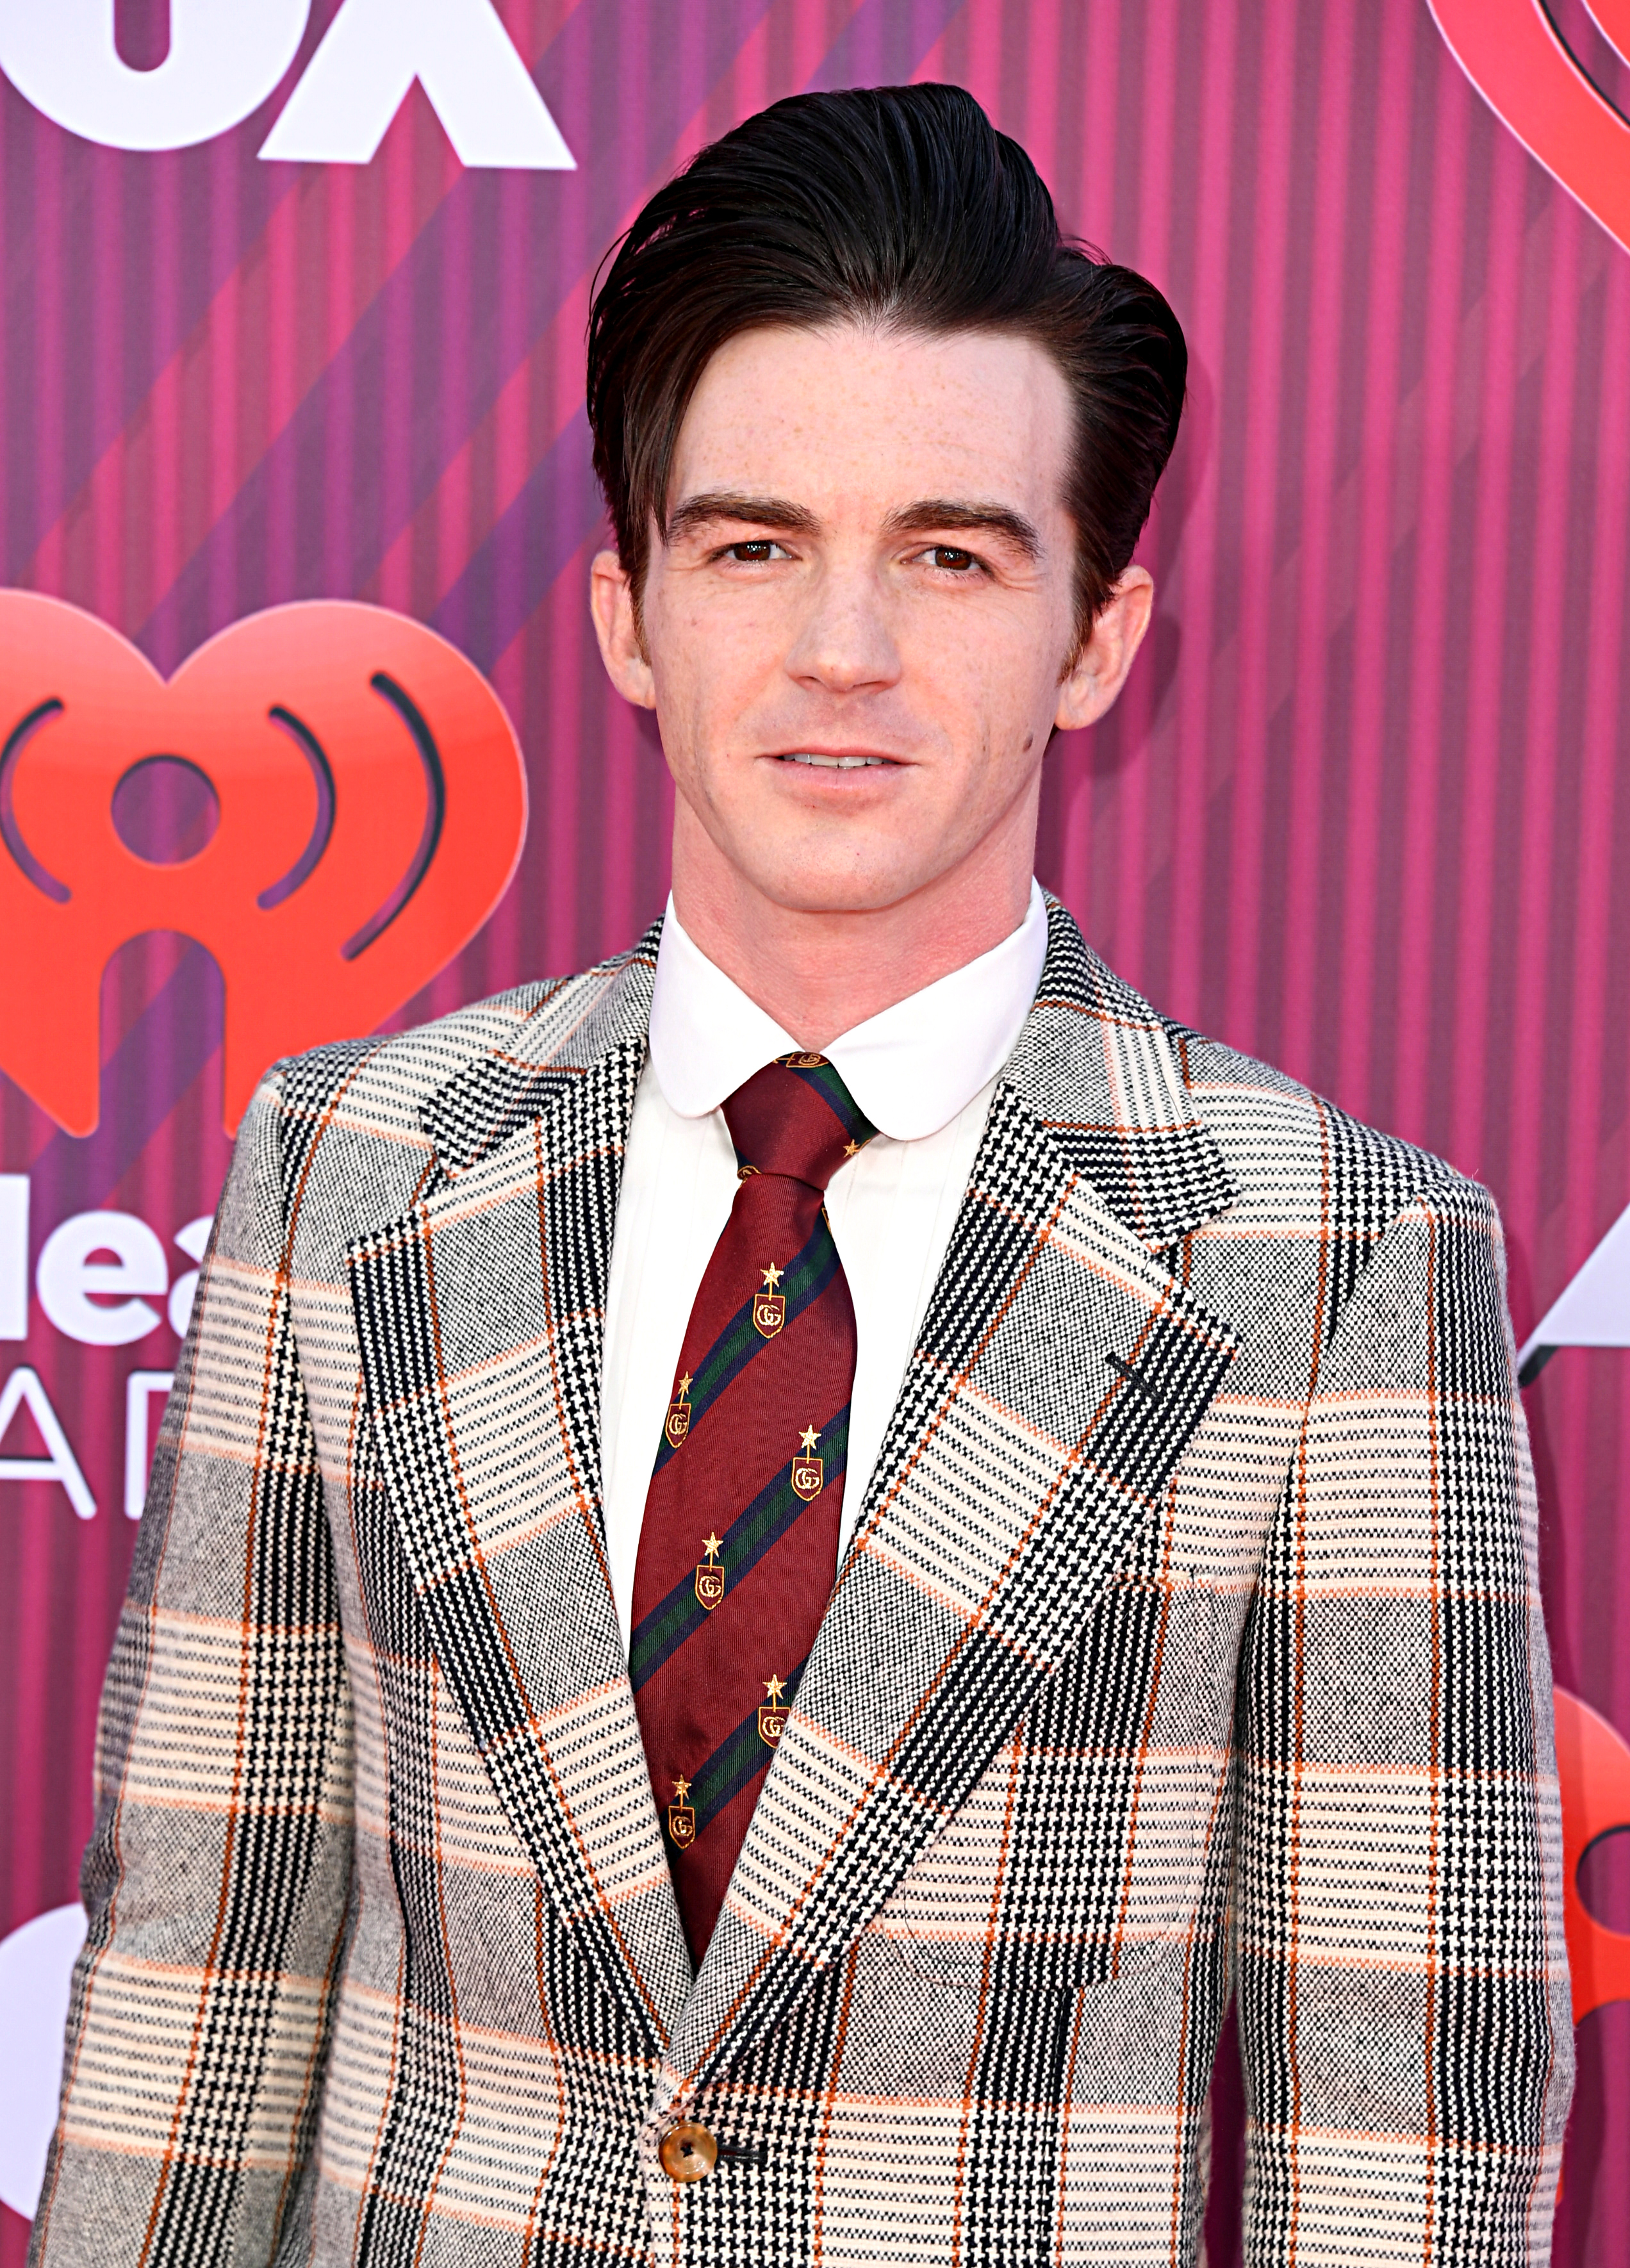 Drake Bell in a plaid suit with a striped shirt and a patterned tie at an event